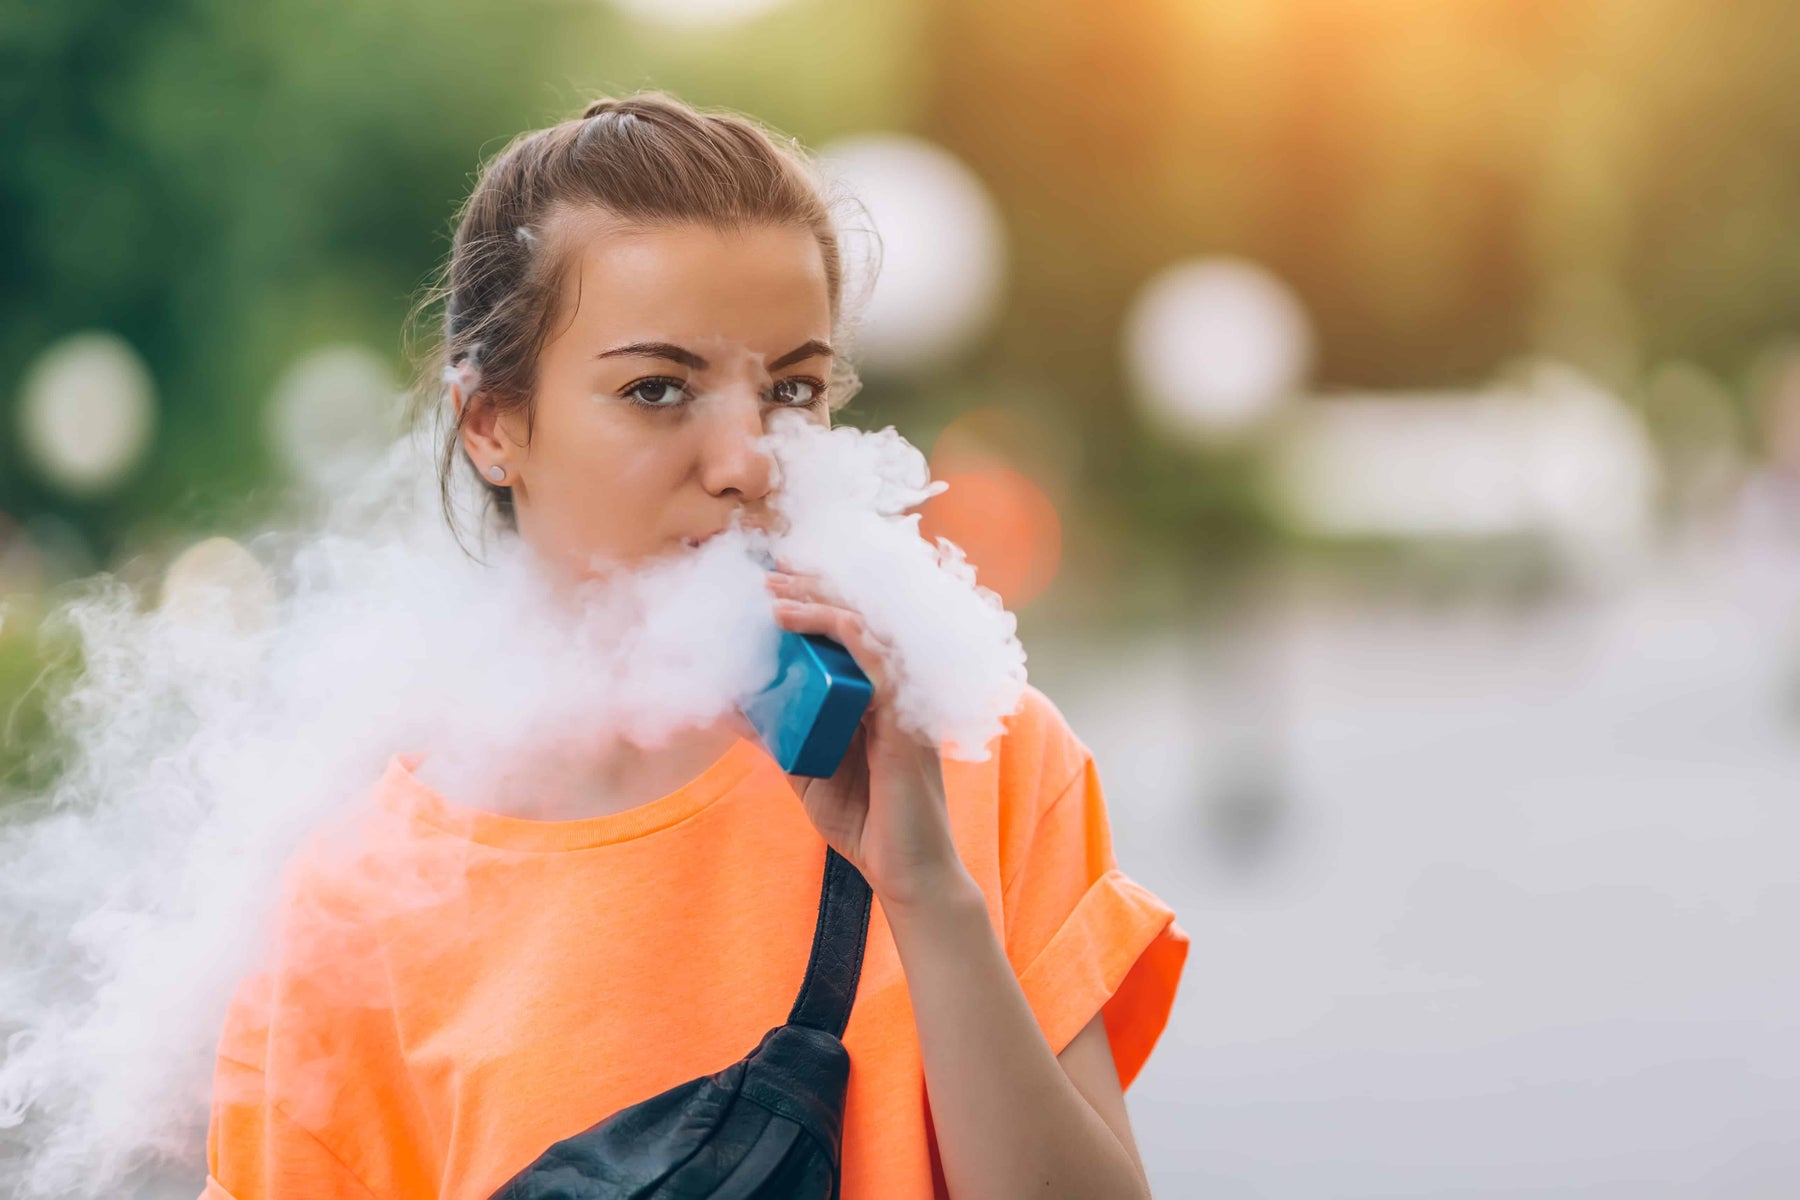 Vaping for beginners: A comprehensive guide 2023